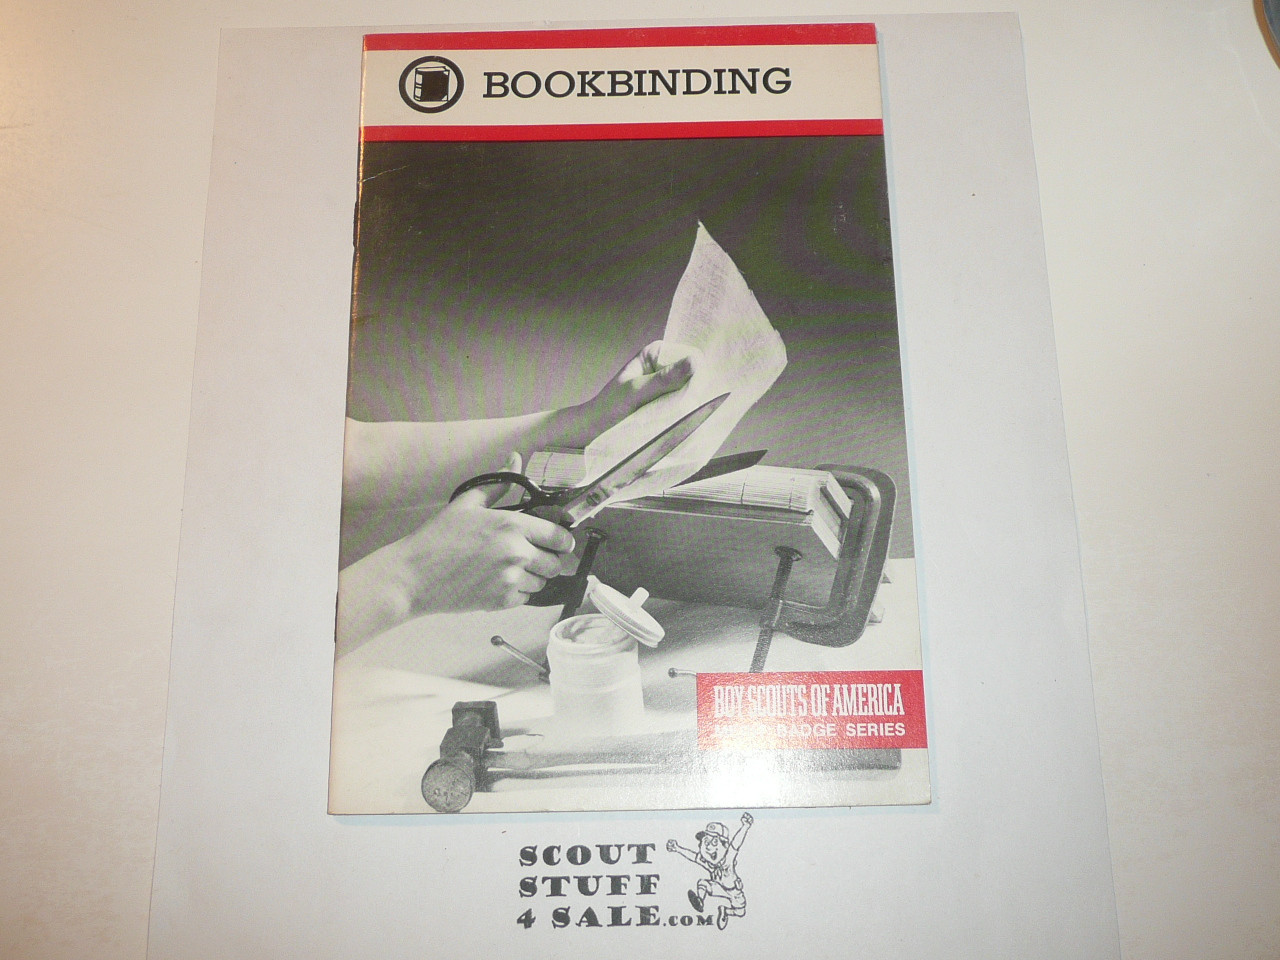 Bookbinding Merit Badge Pamphlet, Type 9, Red Band Cover, 11-86 Printing